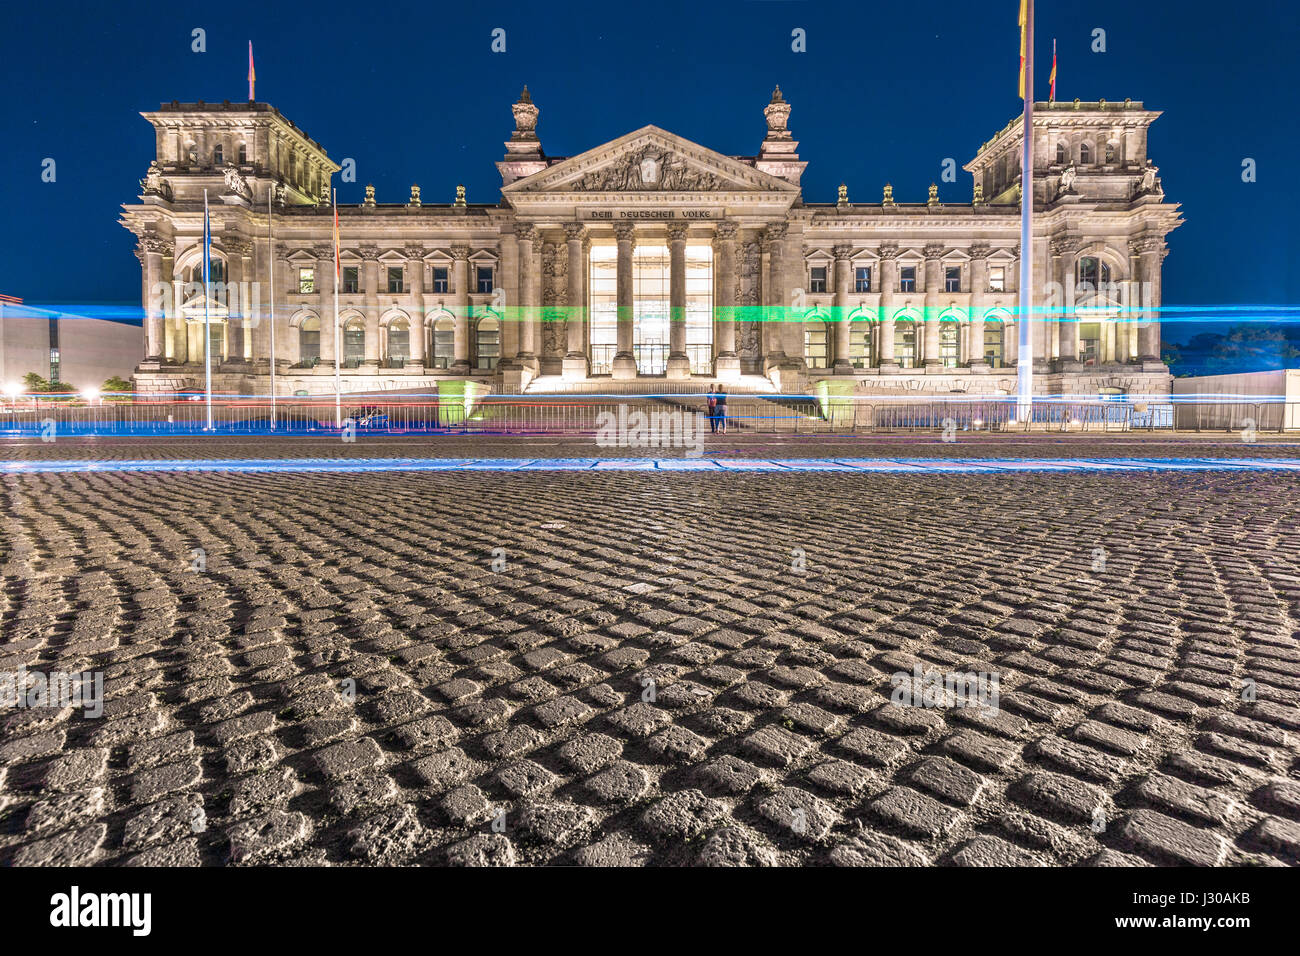 Classic panoramic view of famous Reichstag building, seat of the German Parliament, illuminated in beautiful twilight during blue hour at dusk, Berlin Stock Photo